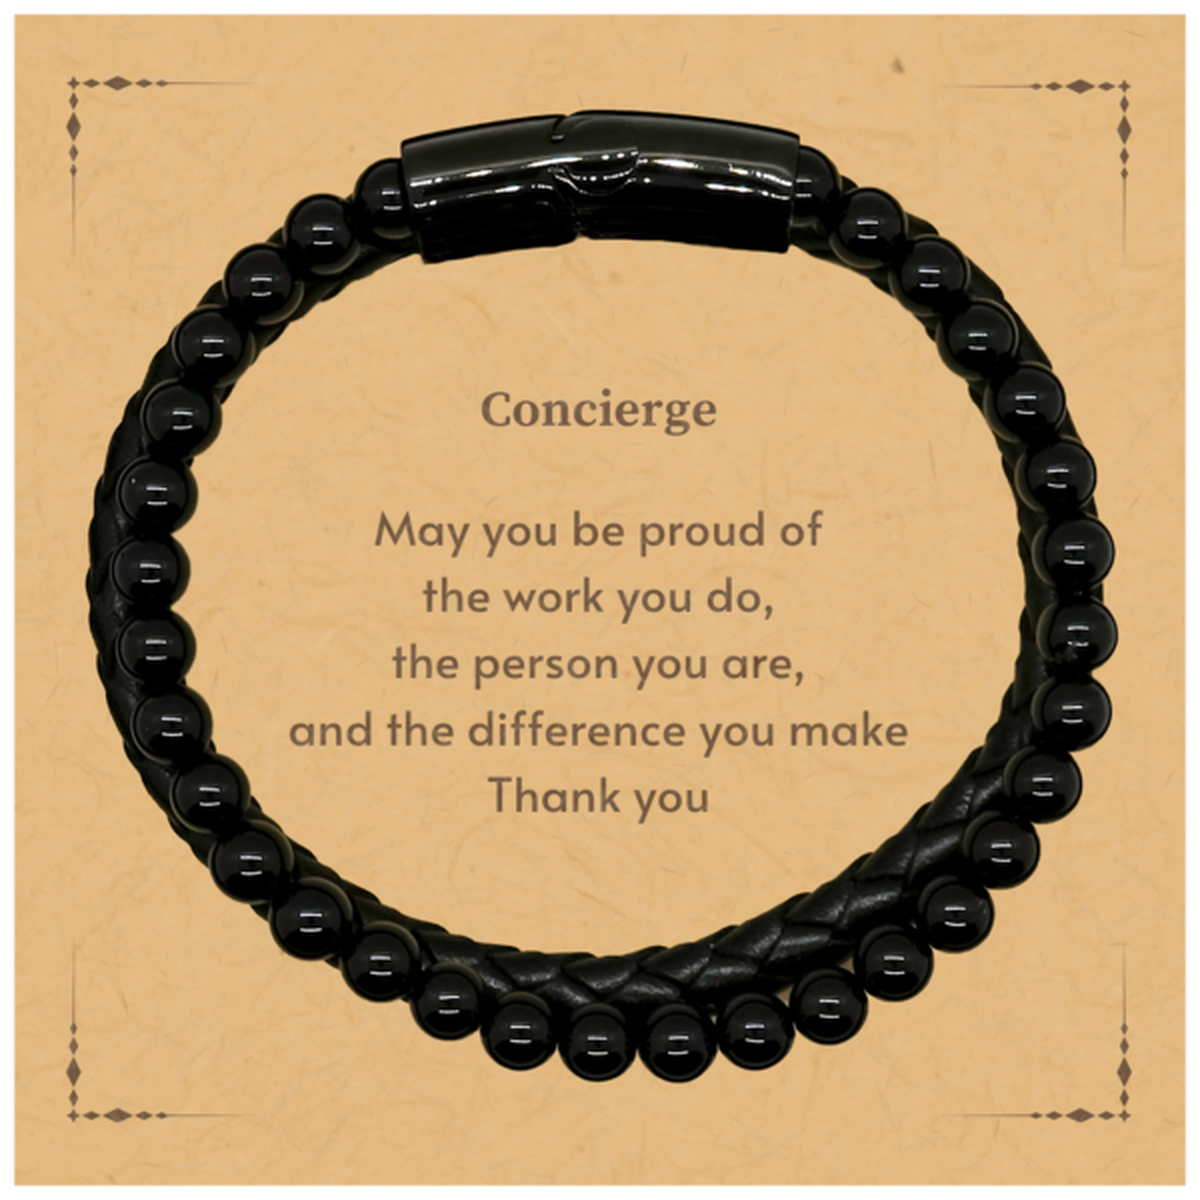 Heartwarming Stone Leather Bracelets Retirement Coworkers Gifts for Concierge, Concierge May You be proud of the work you do, the person you are Gifts for Boss Men Women Friends